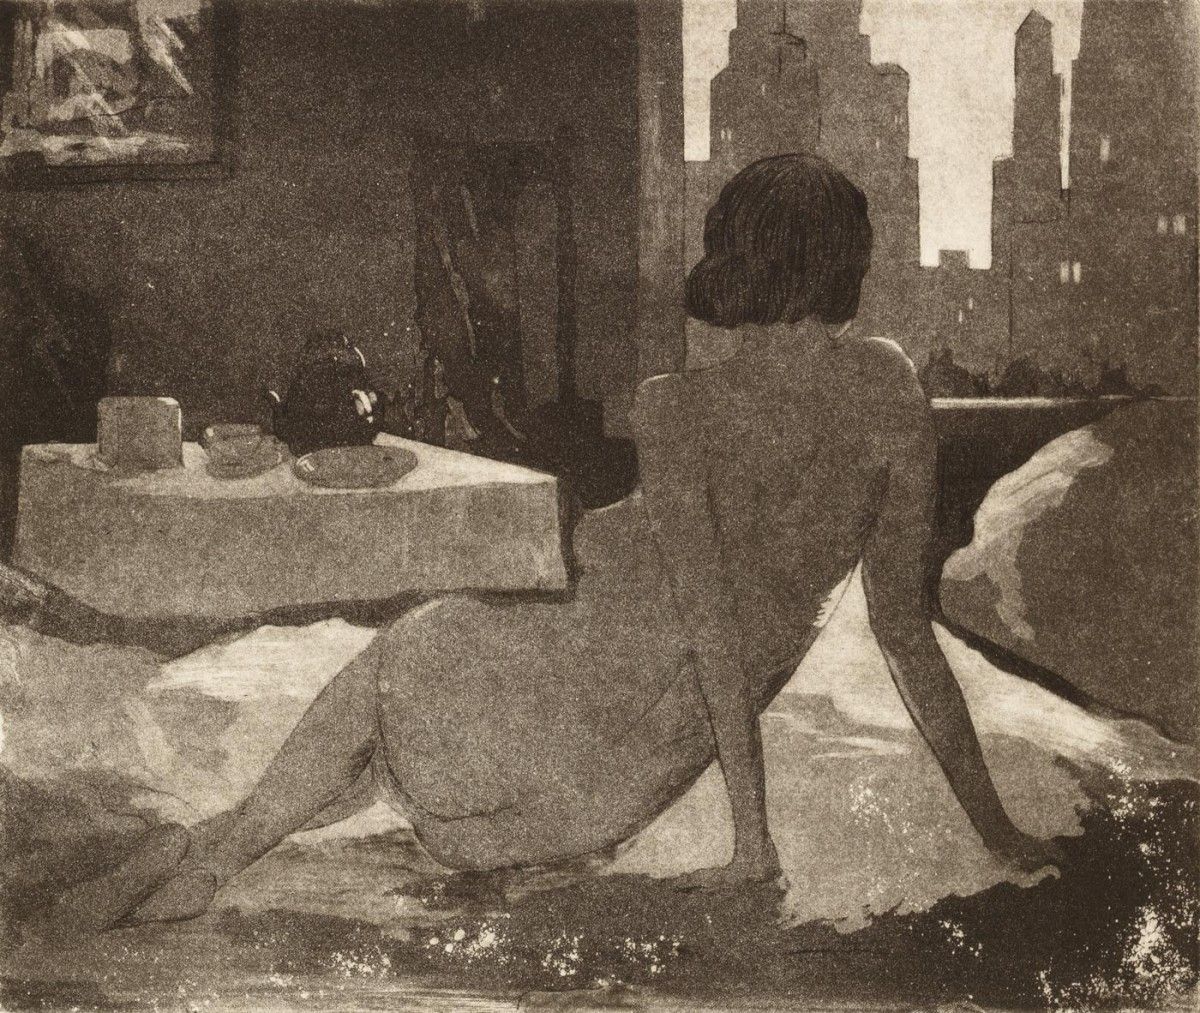 Allan Freelon, Nude with City Scene, ca. 1935, aquatint with soft ground etching in black on ivory wove paper, 10 x 12 in. Gift of Joel S. Dryer, 2021